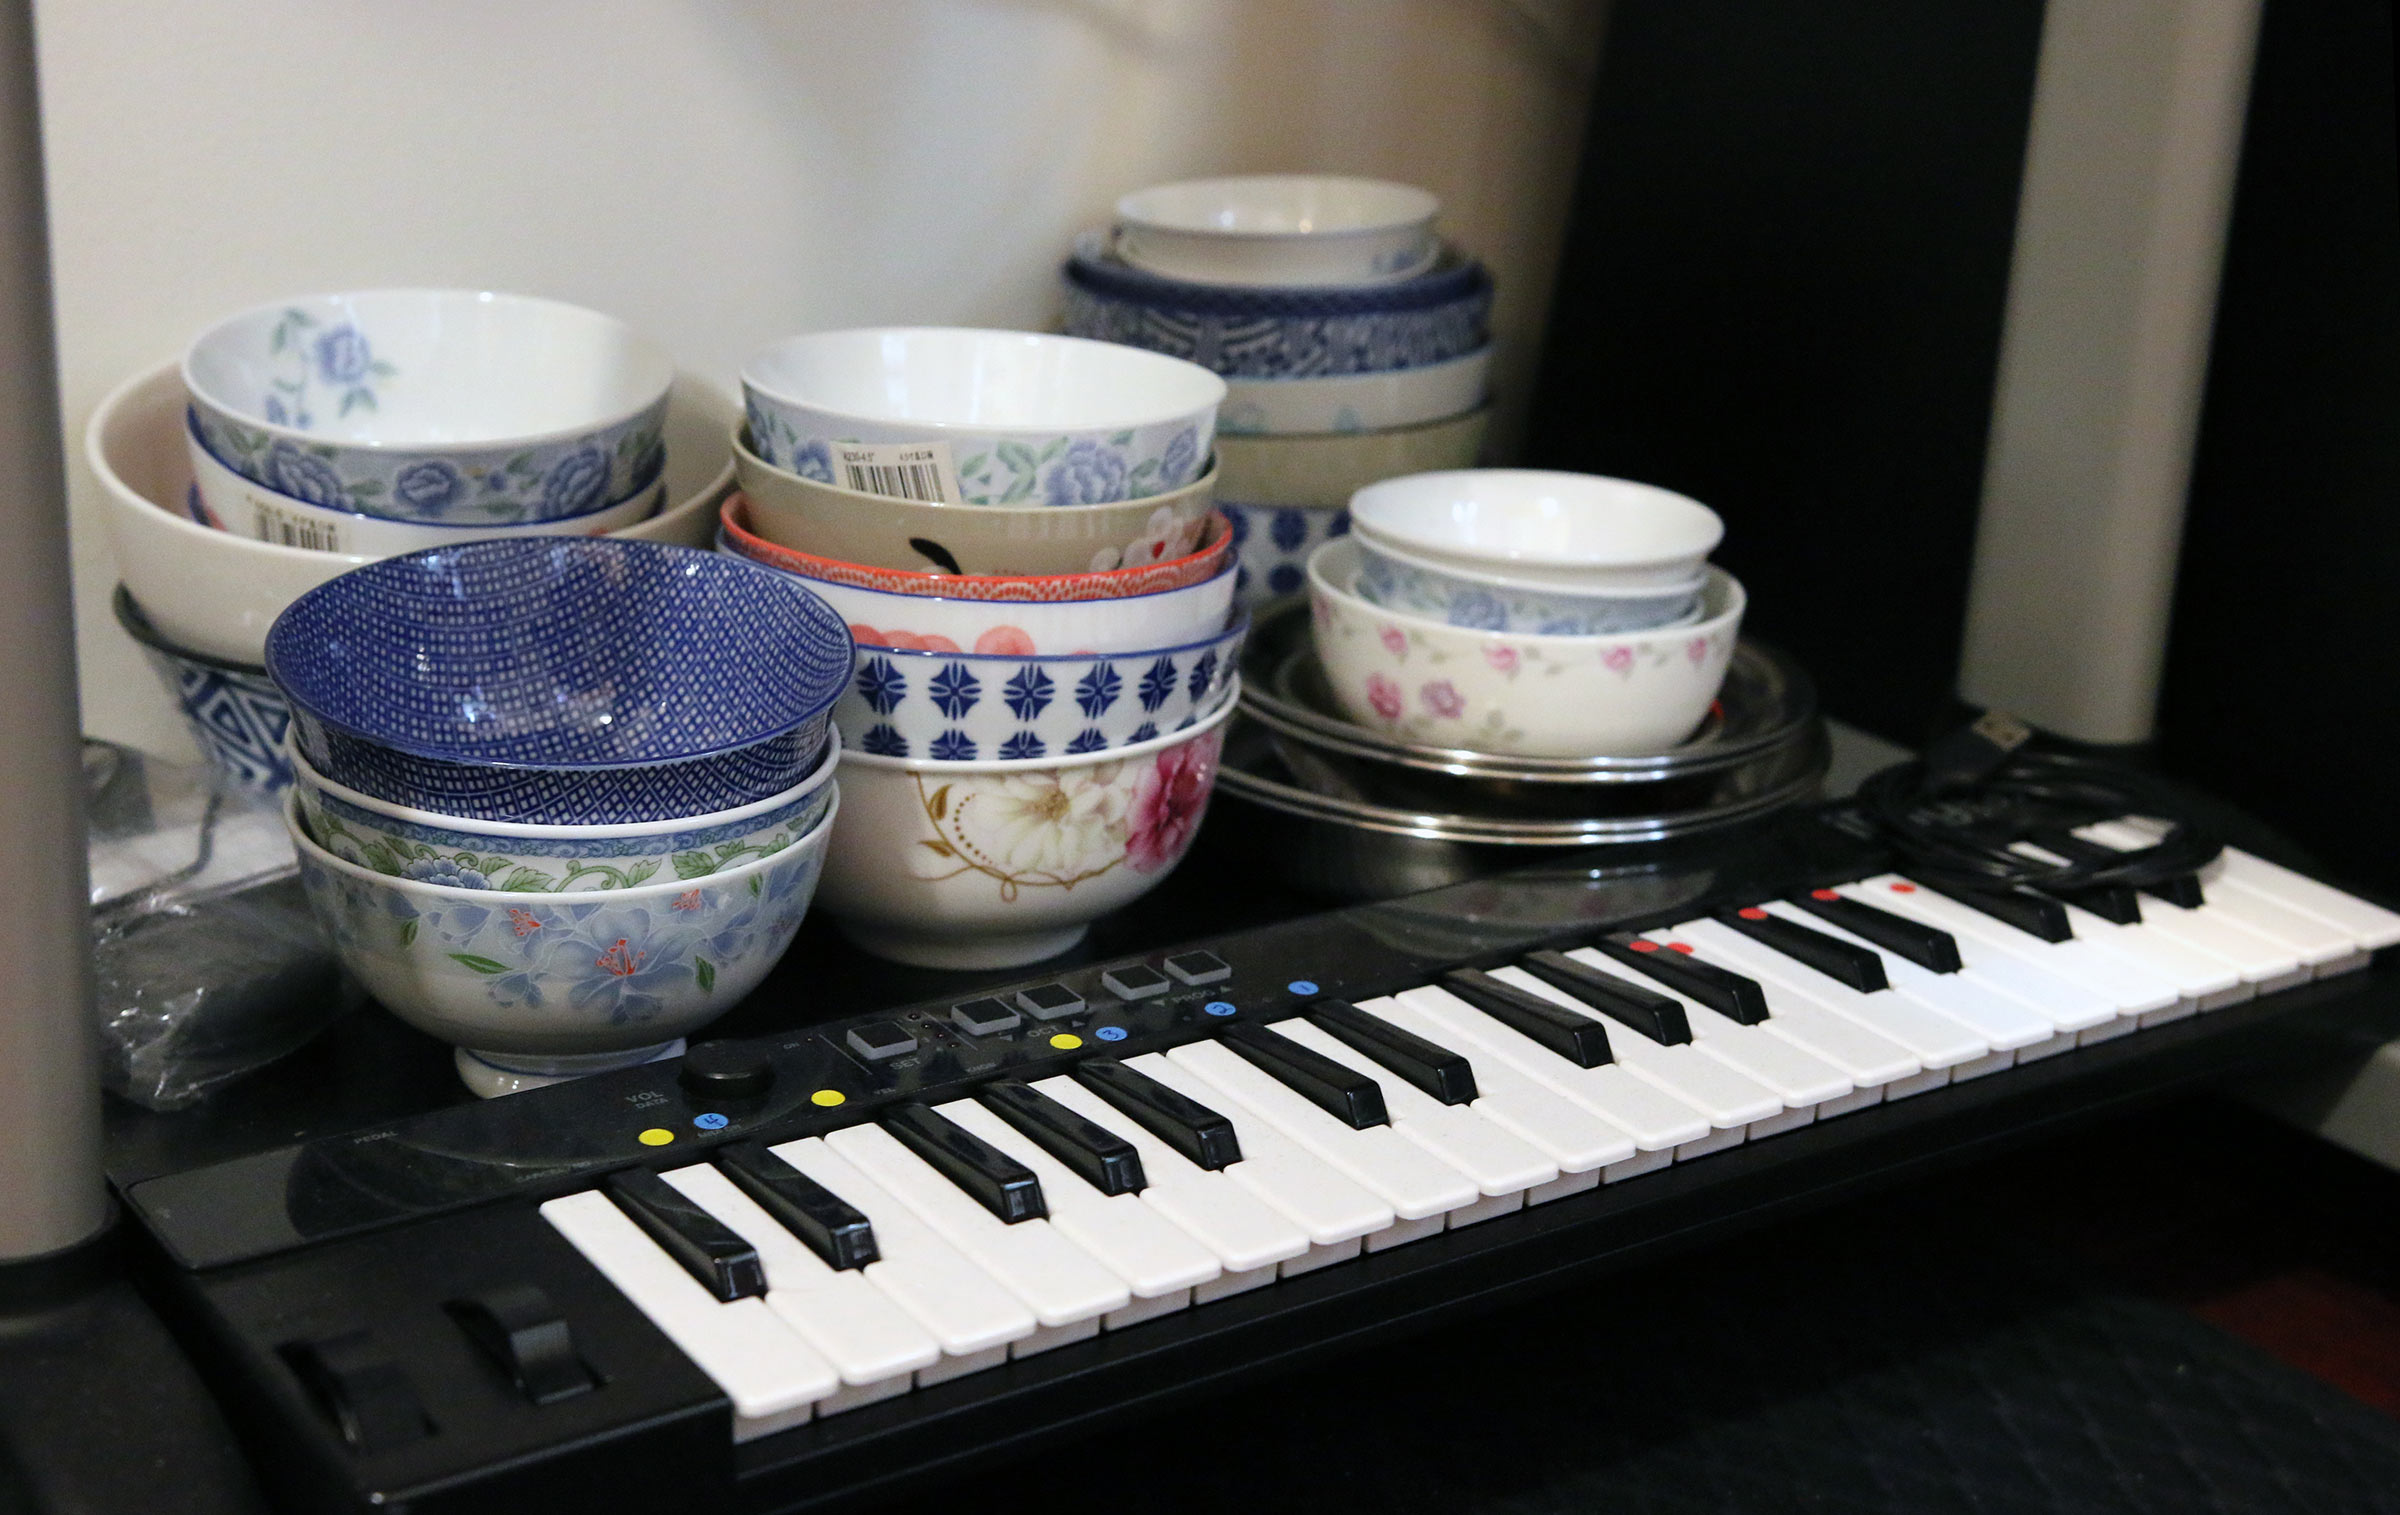 A group of ceramic bowls in back of a sampling keyboard.